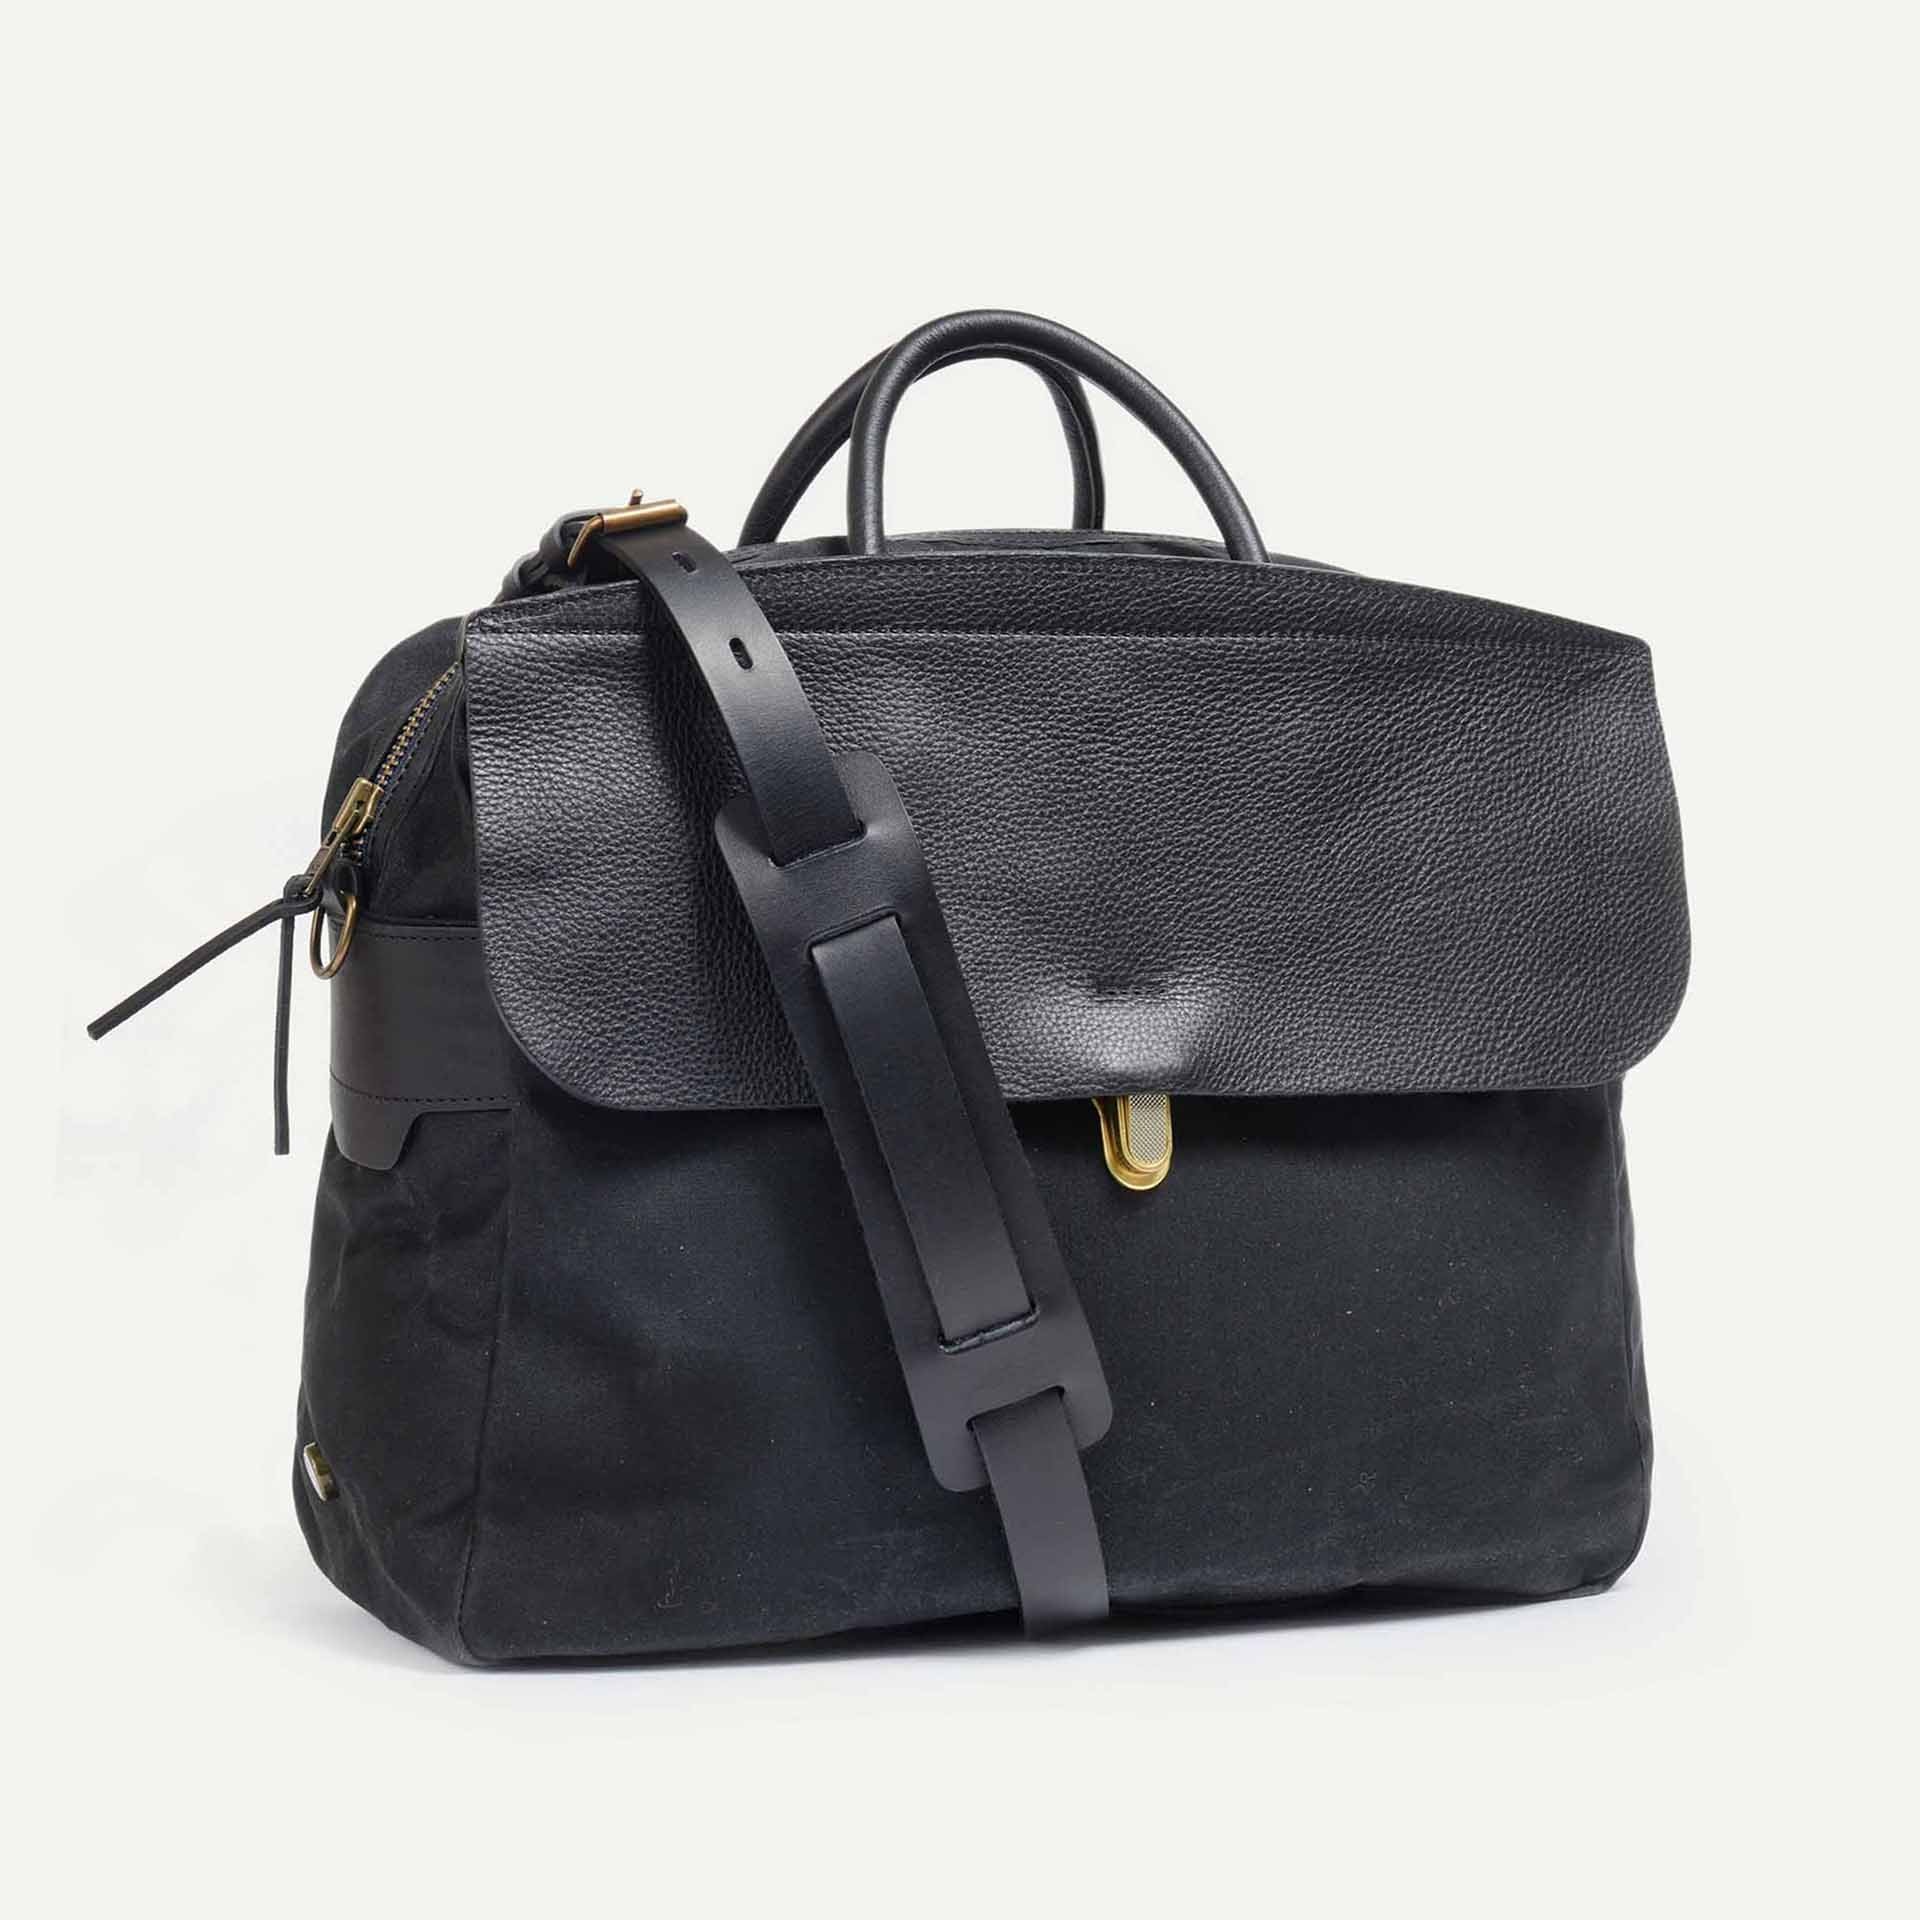 Zeppo Business bag - Canvas and leather - Black